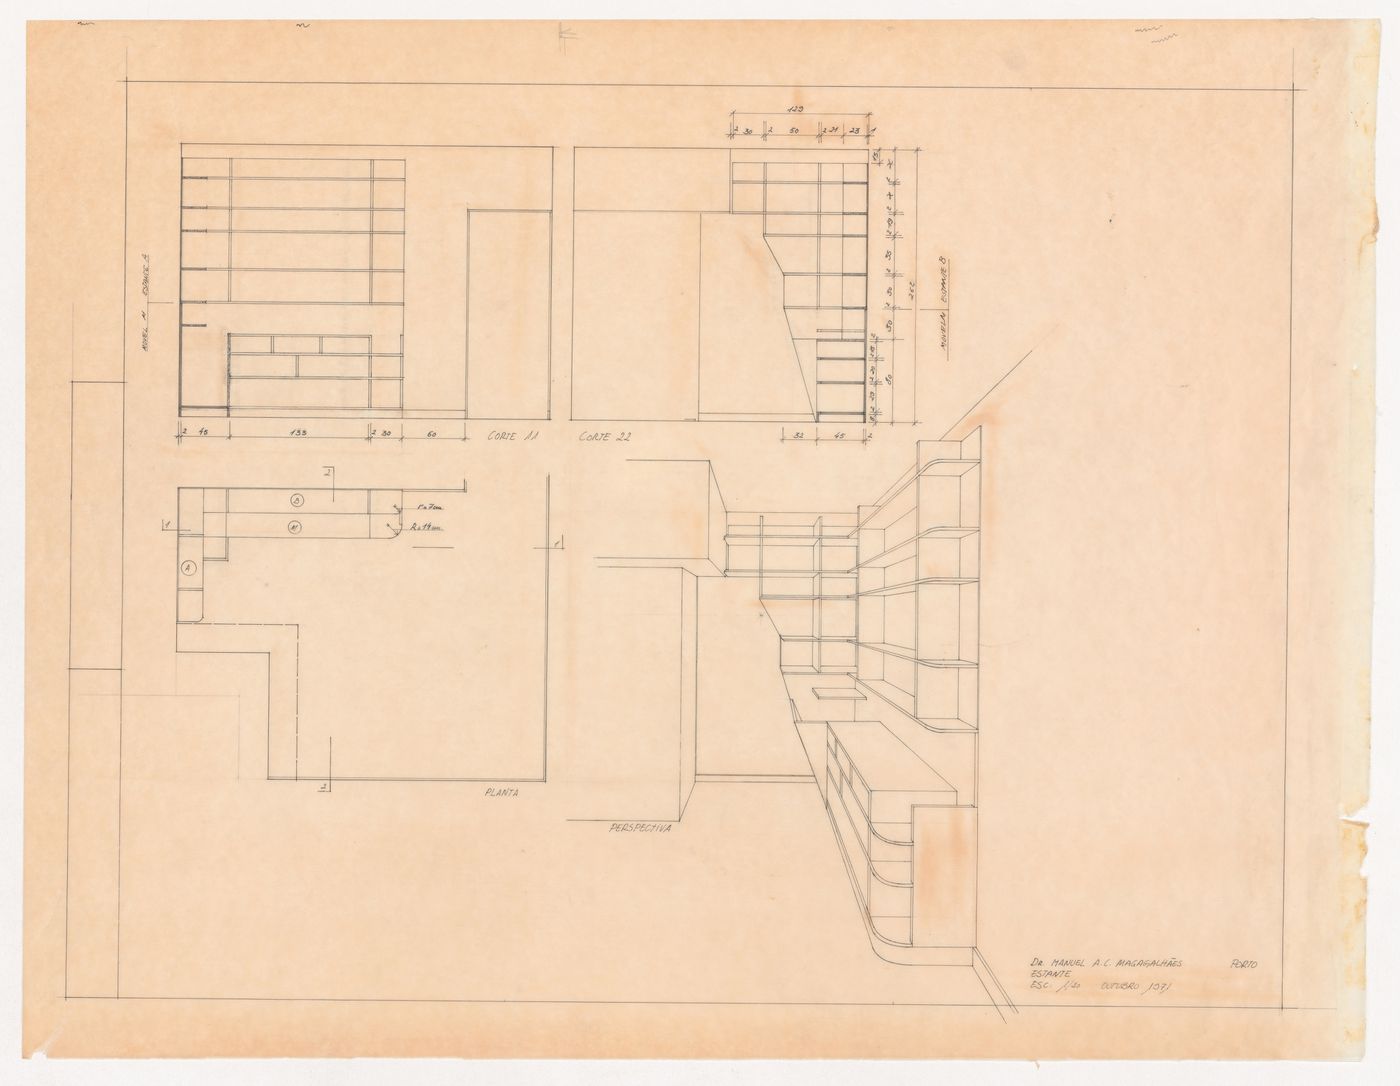 Sections, plan and perspective for bookcase for Casa Manuel Magalhães, Porto